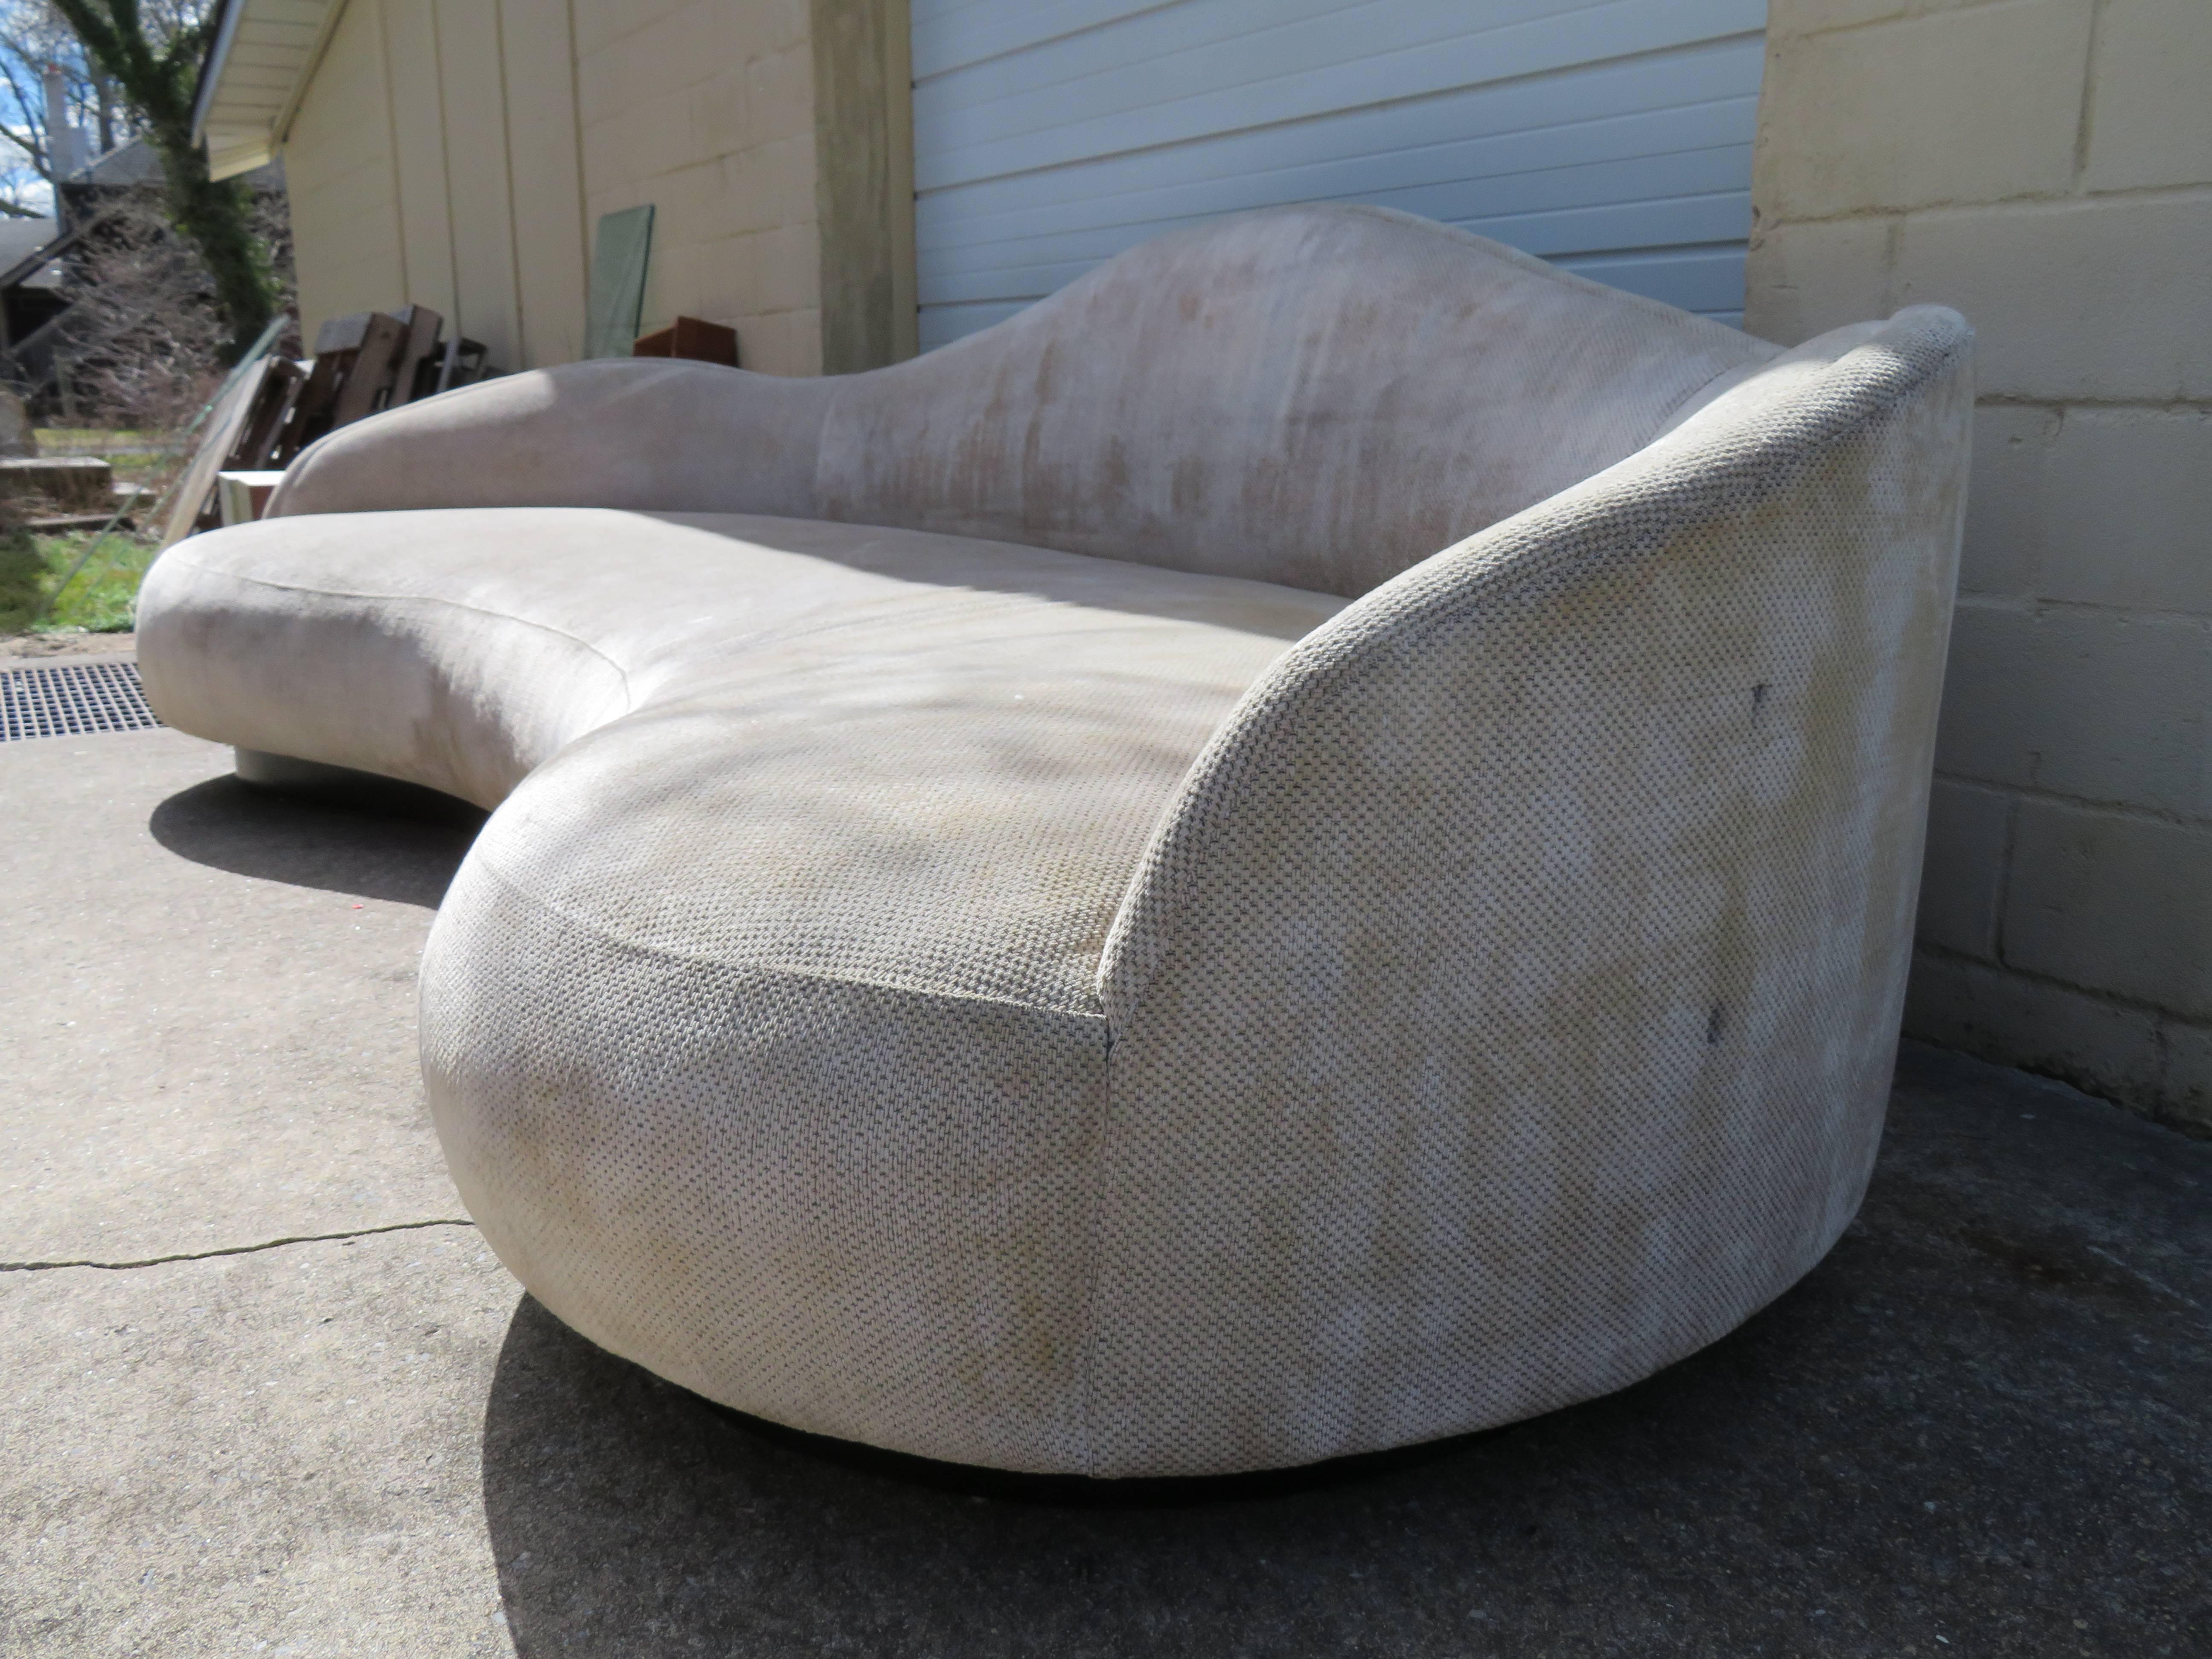 Monumental curved cloud sofa. This sofa is probably the largest sofa we have ever seen measuring a whooping 146